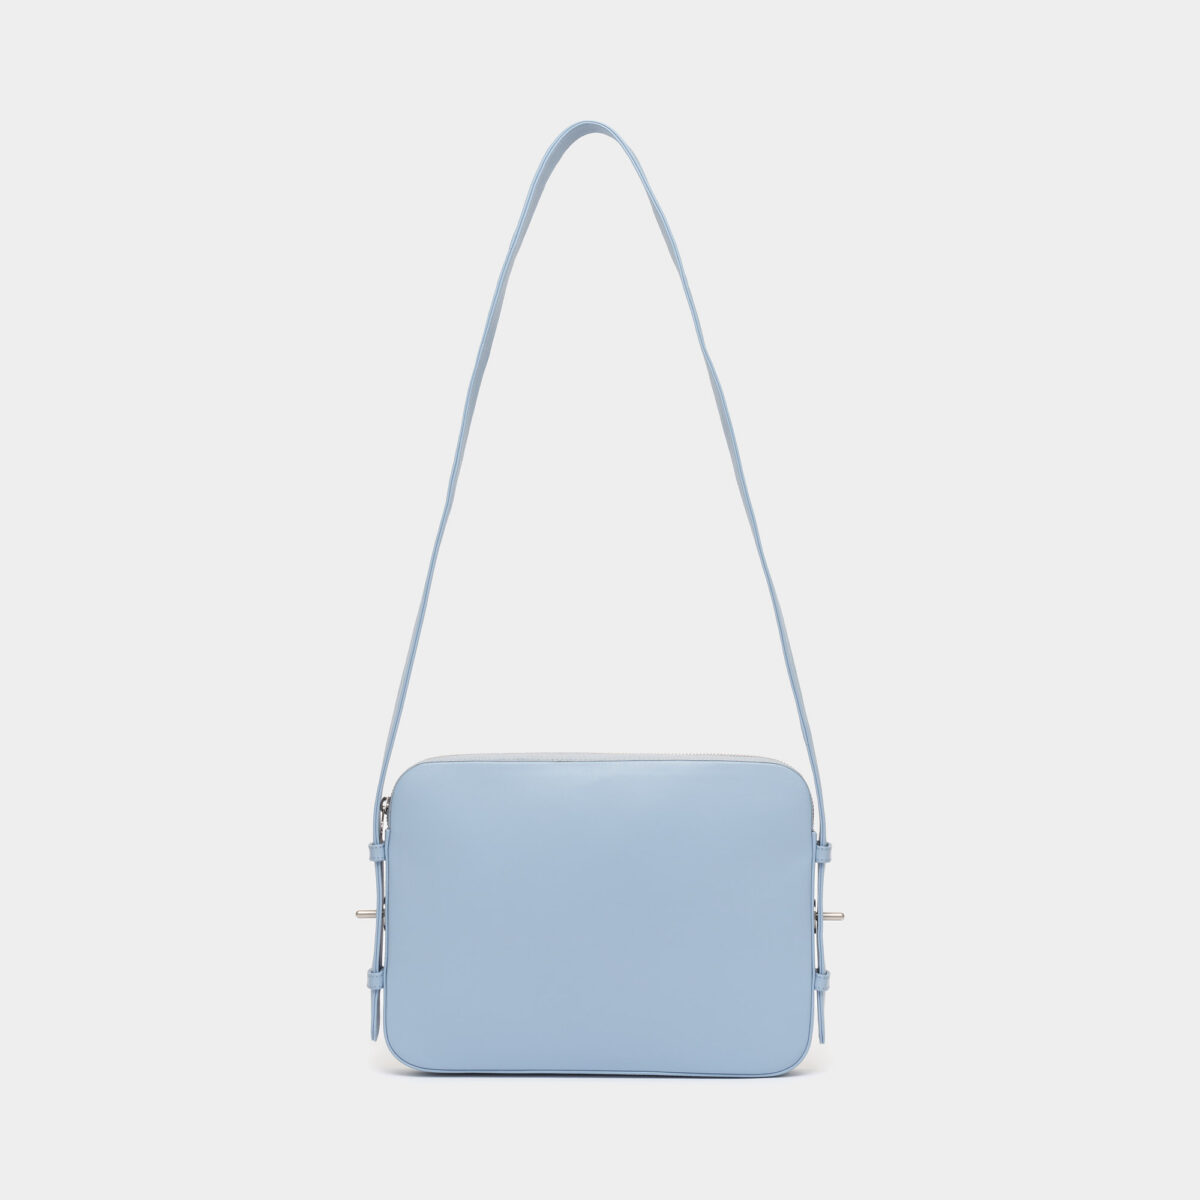 D05-leather-bag-blu-fronte